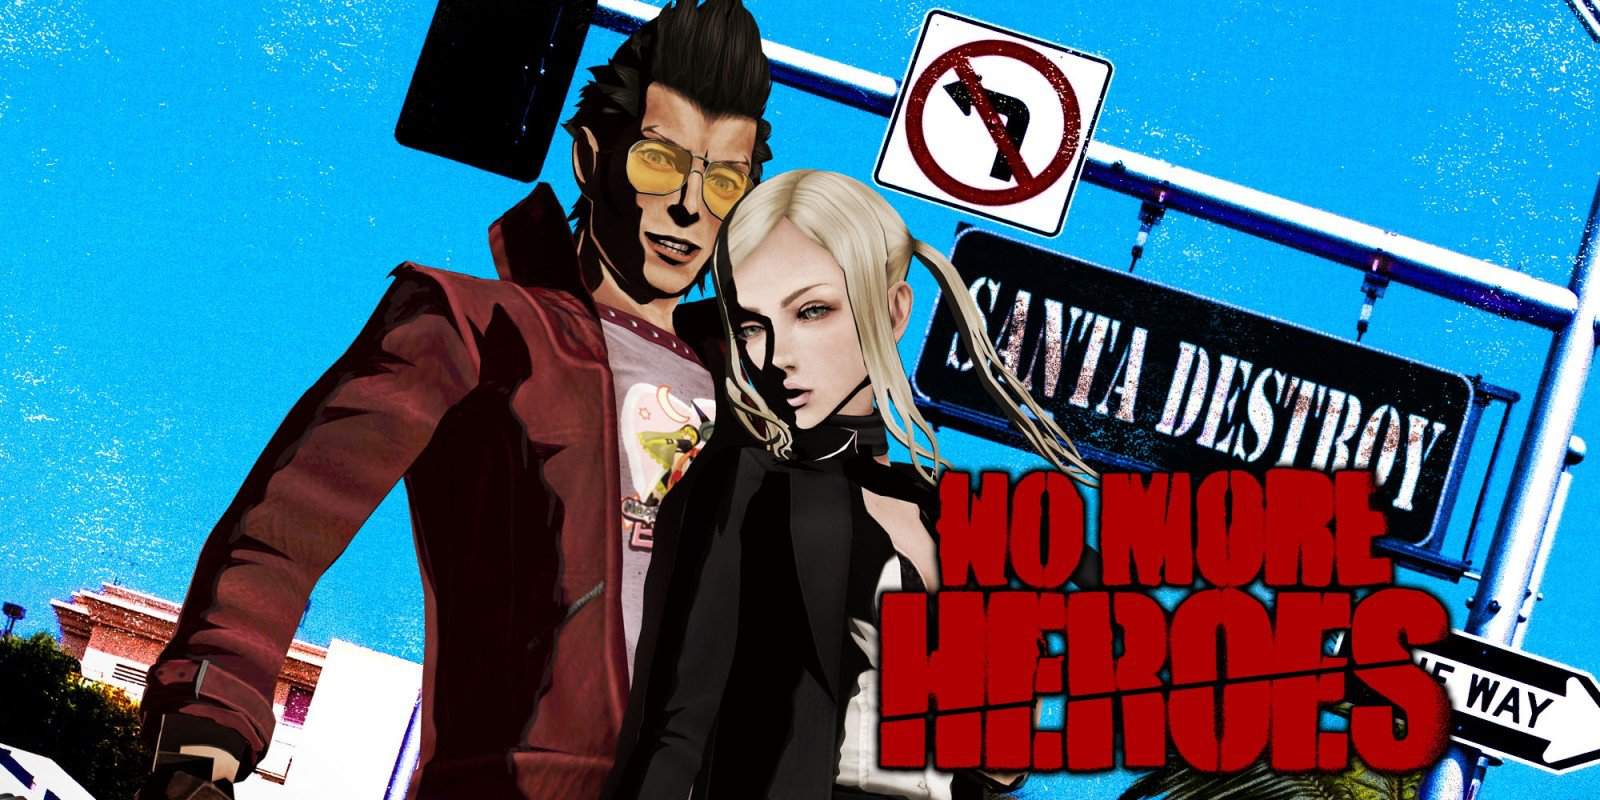 No More Heroes Promotional Artwork